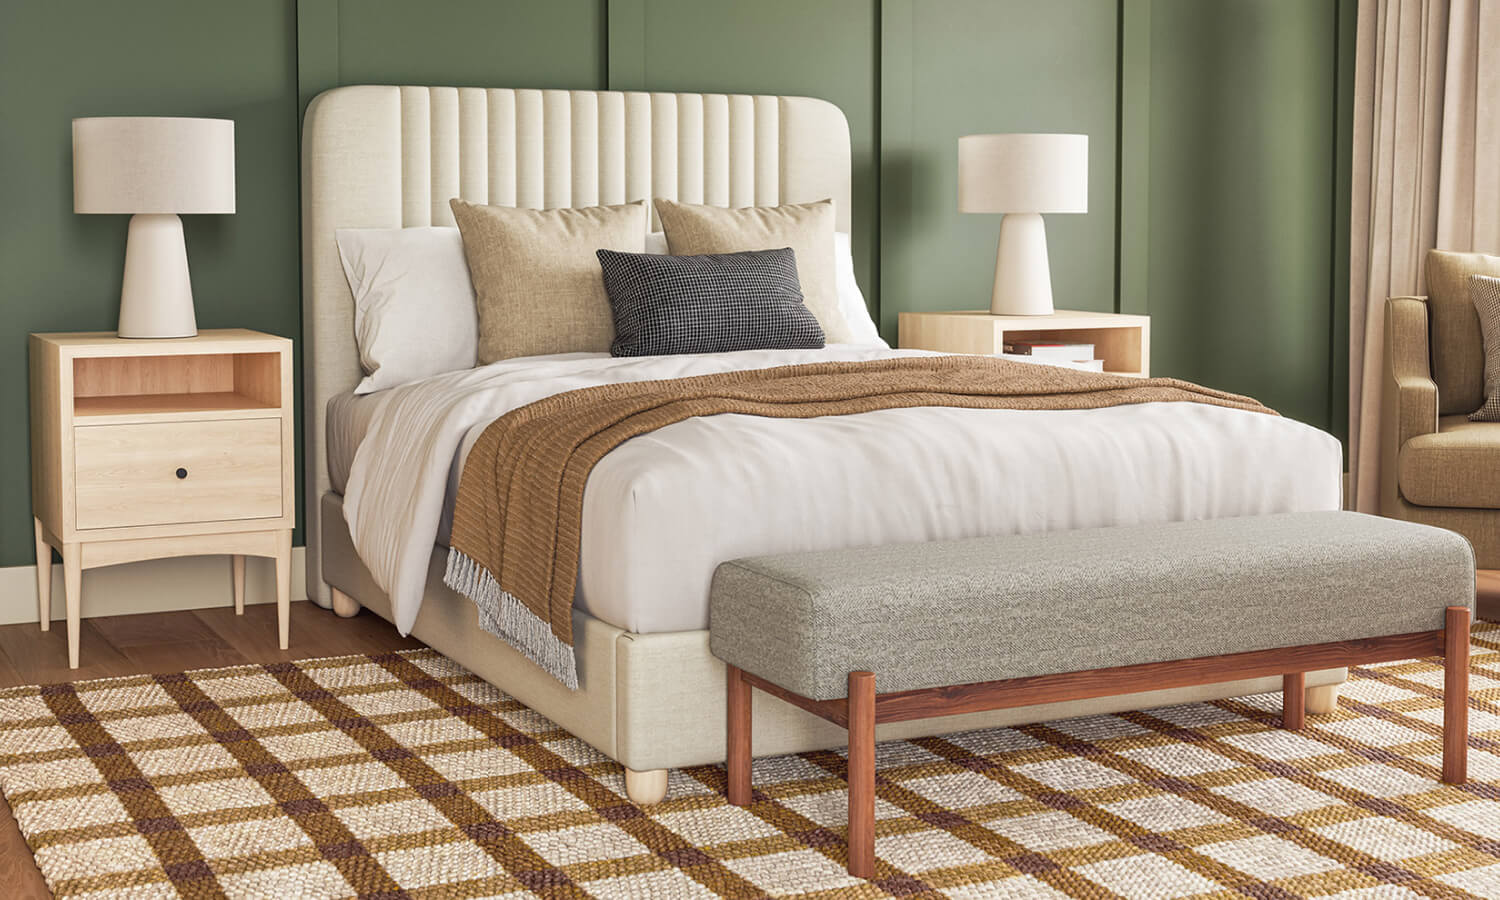 G: Pippen Bed in Deluxe Nougat fabric, Paloma Bench in Melton Feather fabric, Medley Throw Pillows, and Atten Nightstands